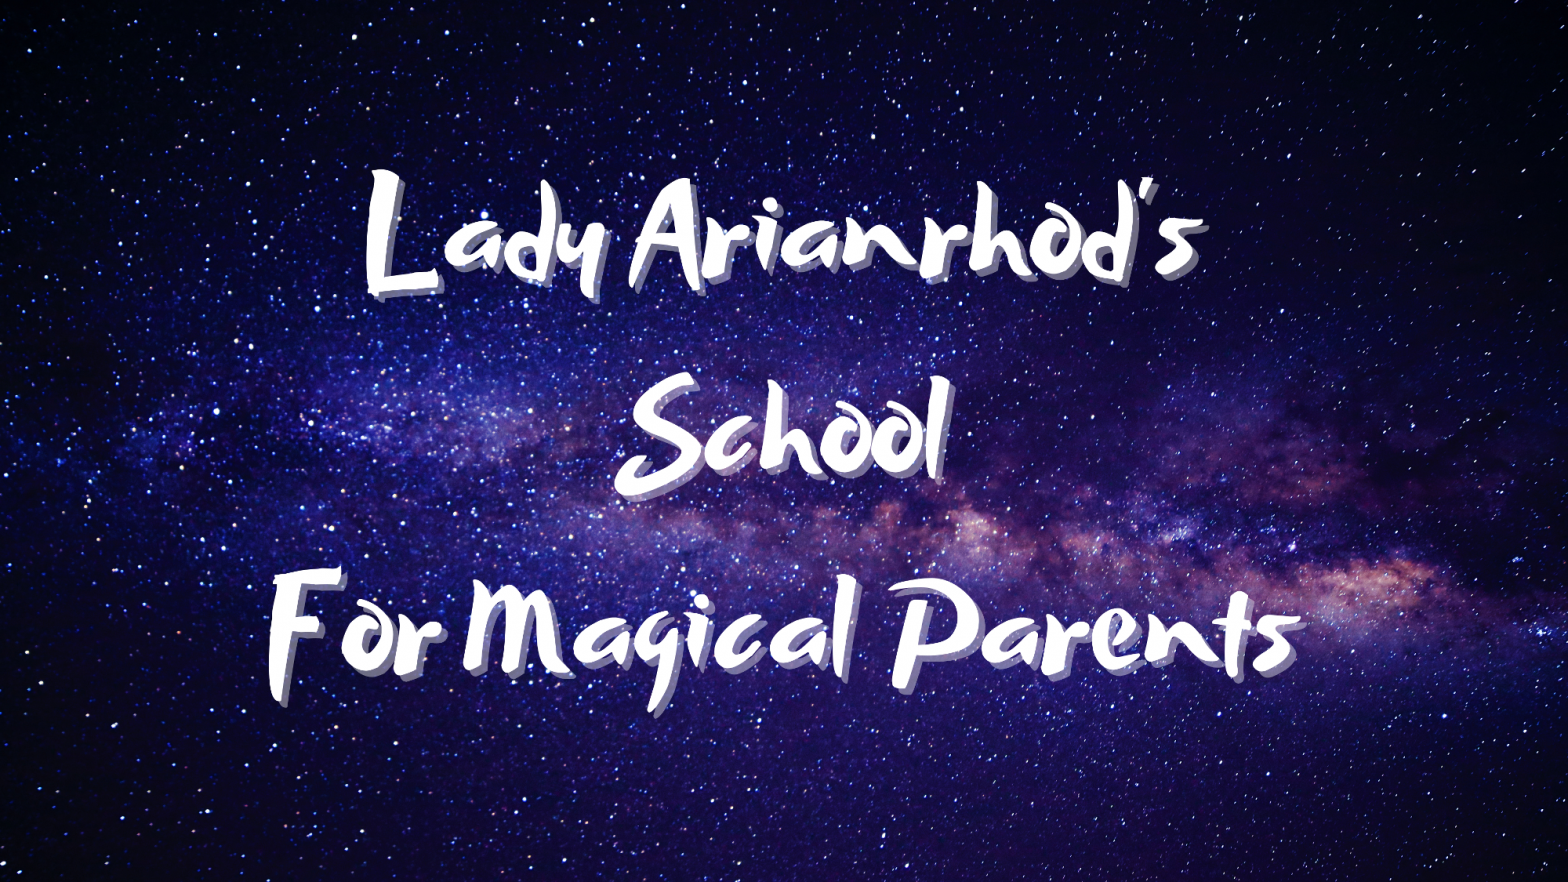 Purple-blue galaxy starfield. White text: Lady Arianrhod's School For Magical Parents